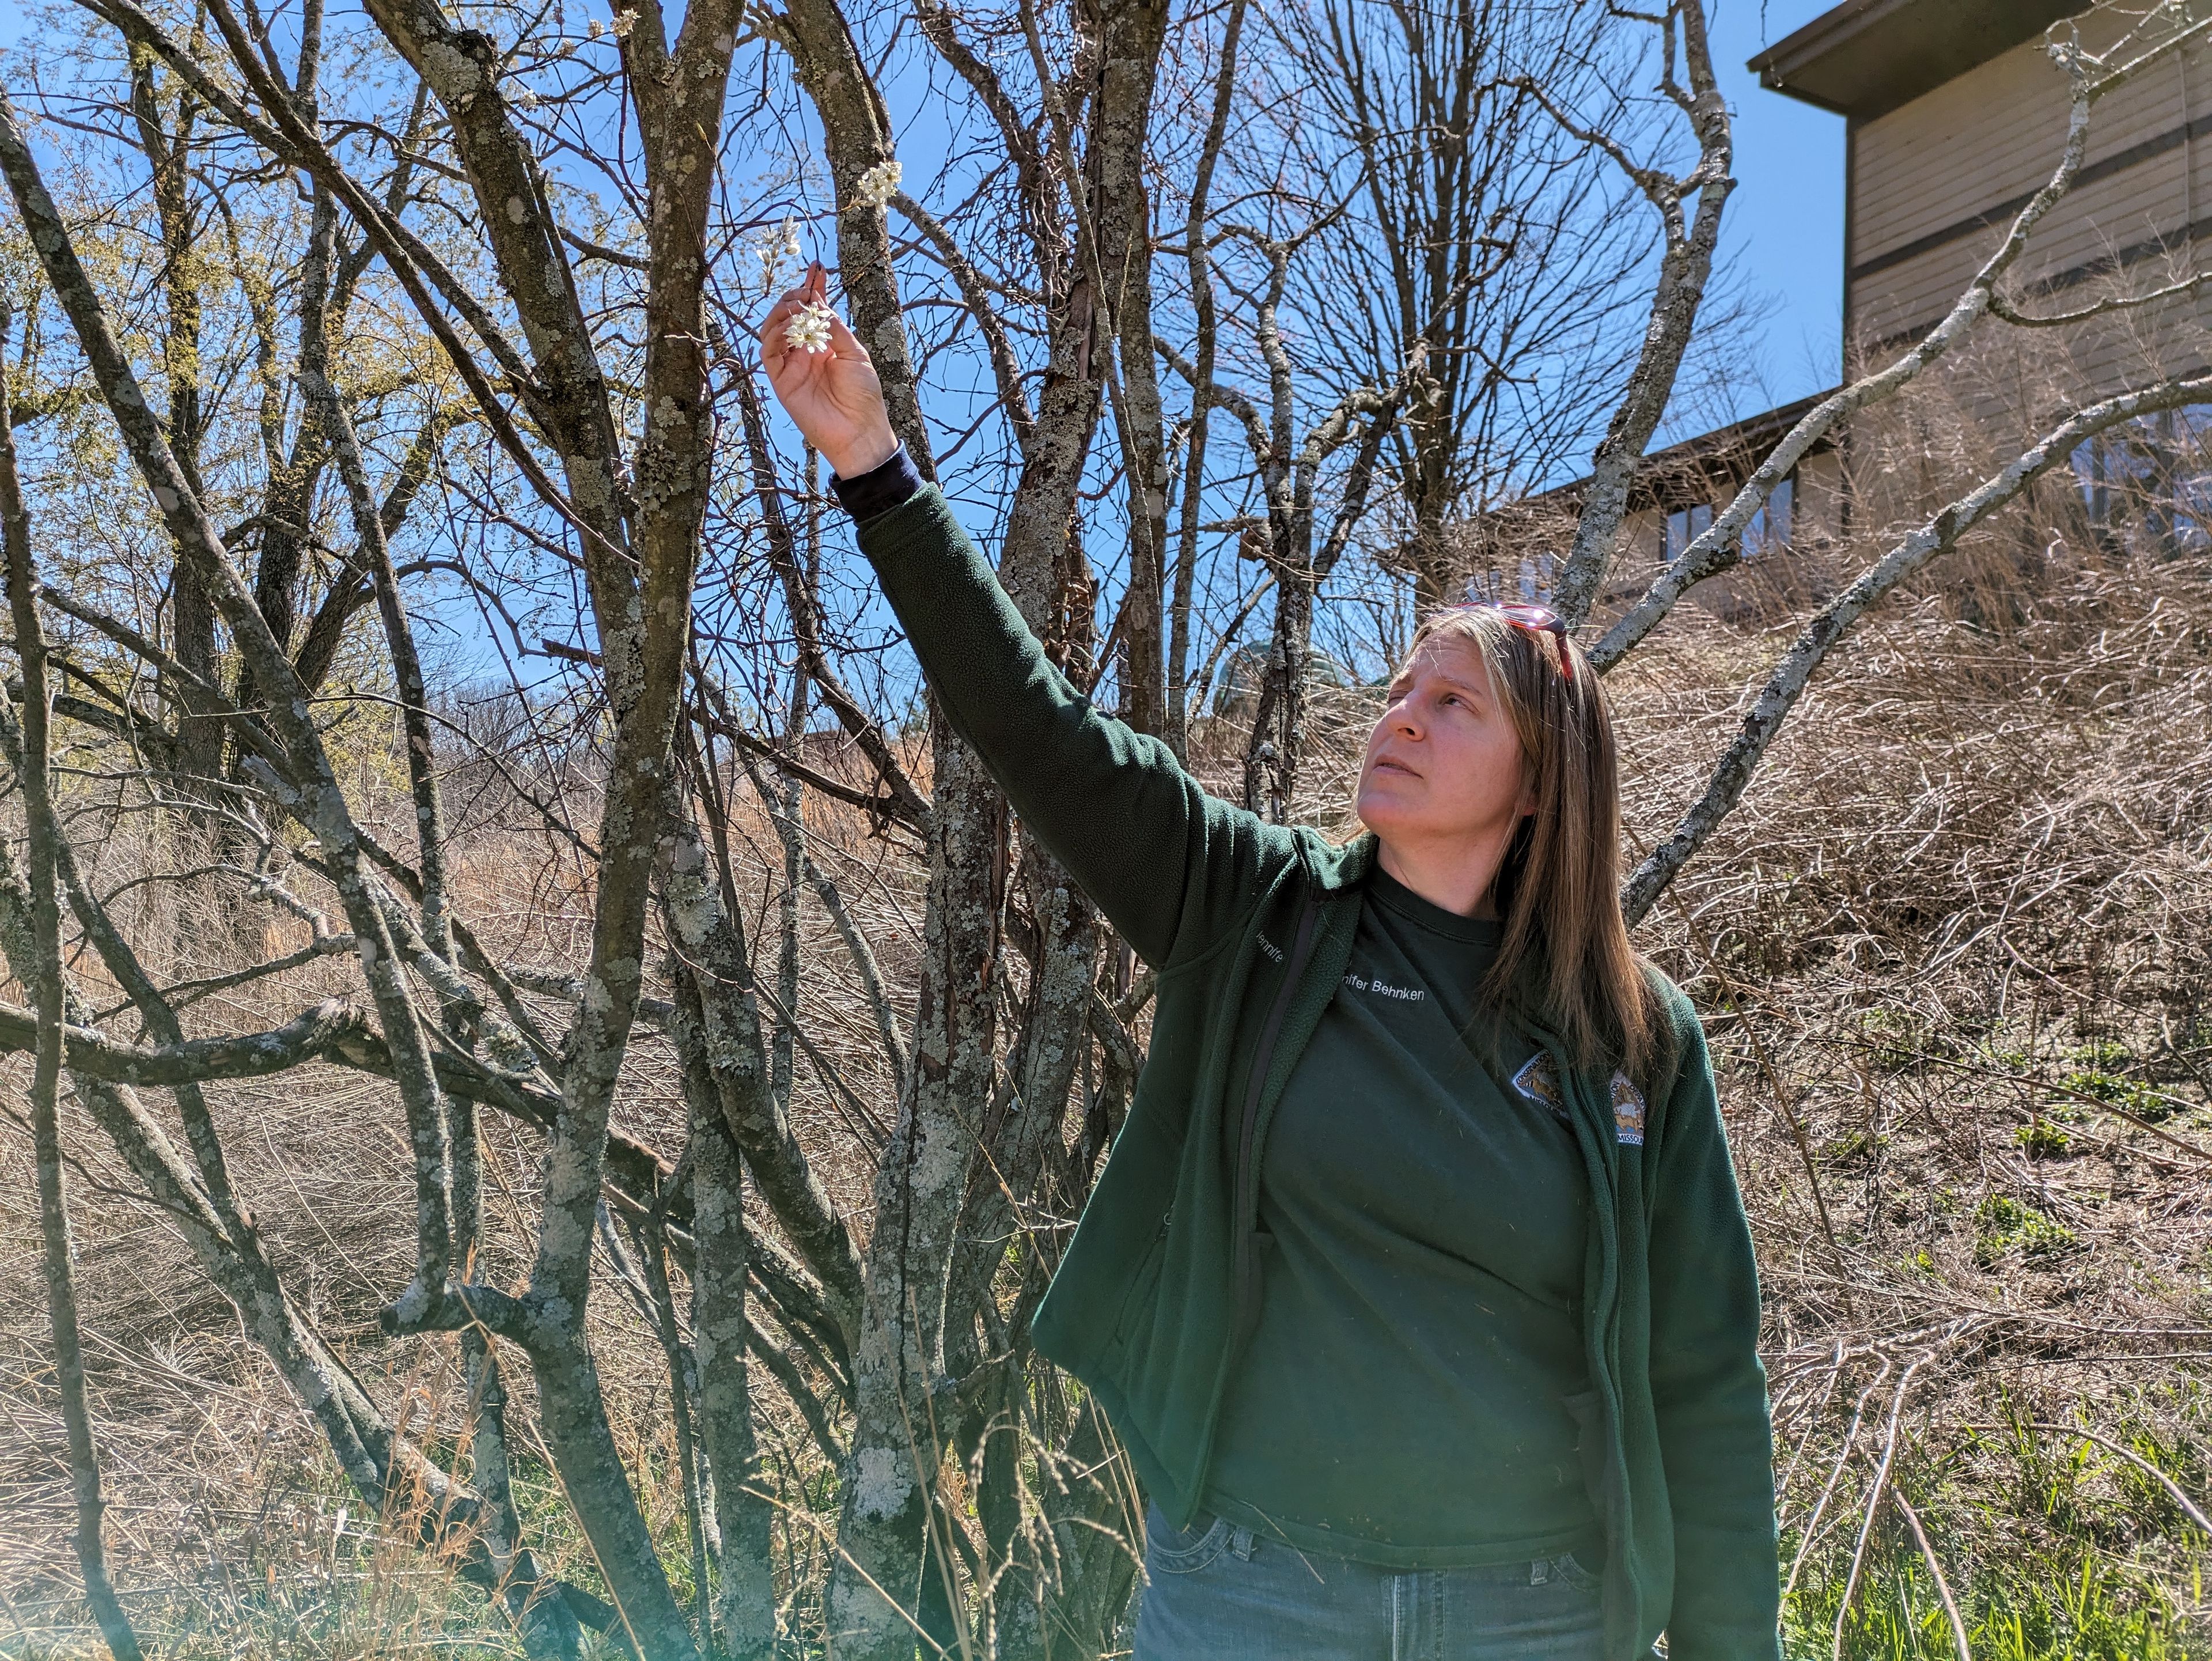 Jennifer Behnken describes the attributes of the serviceberry tree. The tree is one of many environmentally friendly alternatives to the Callery pear.